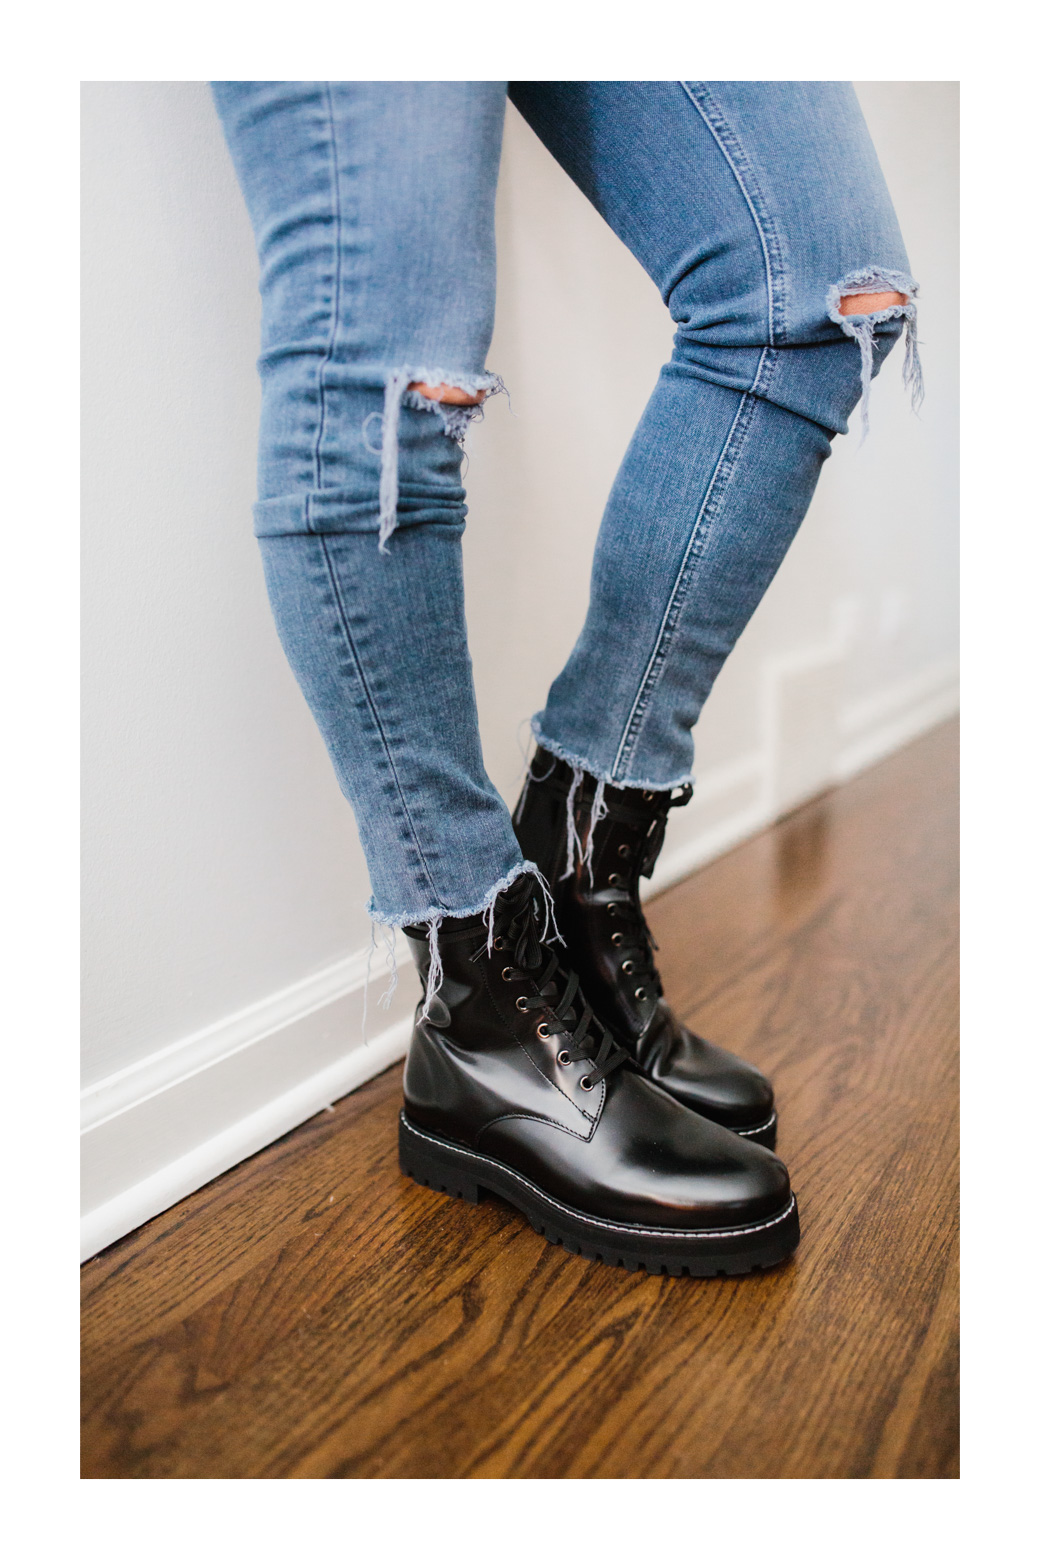 jeans and combat boots outfits